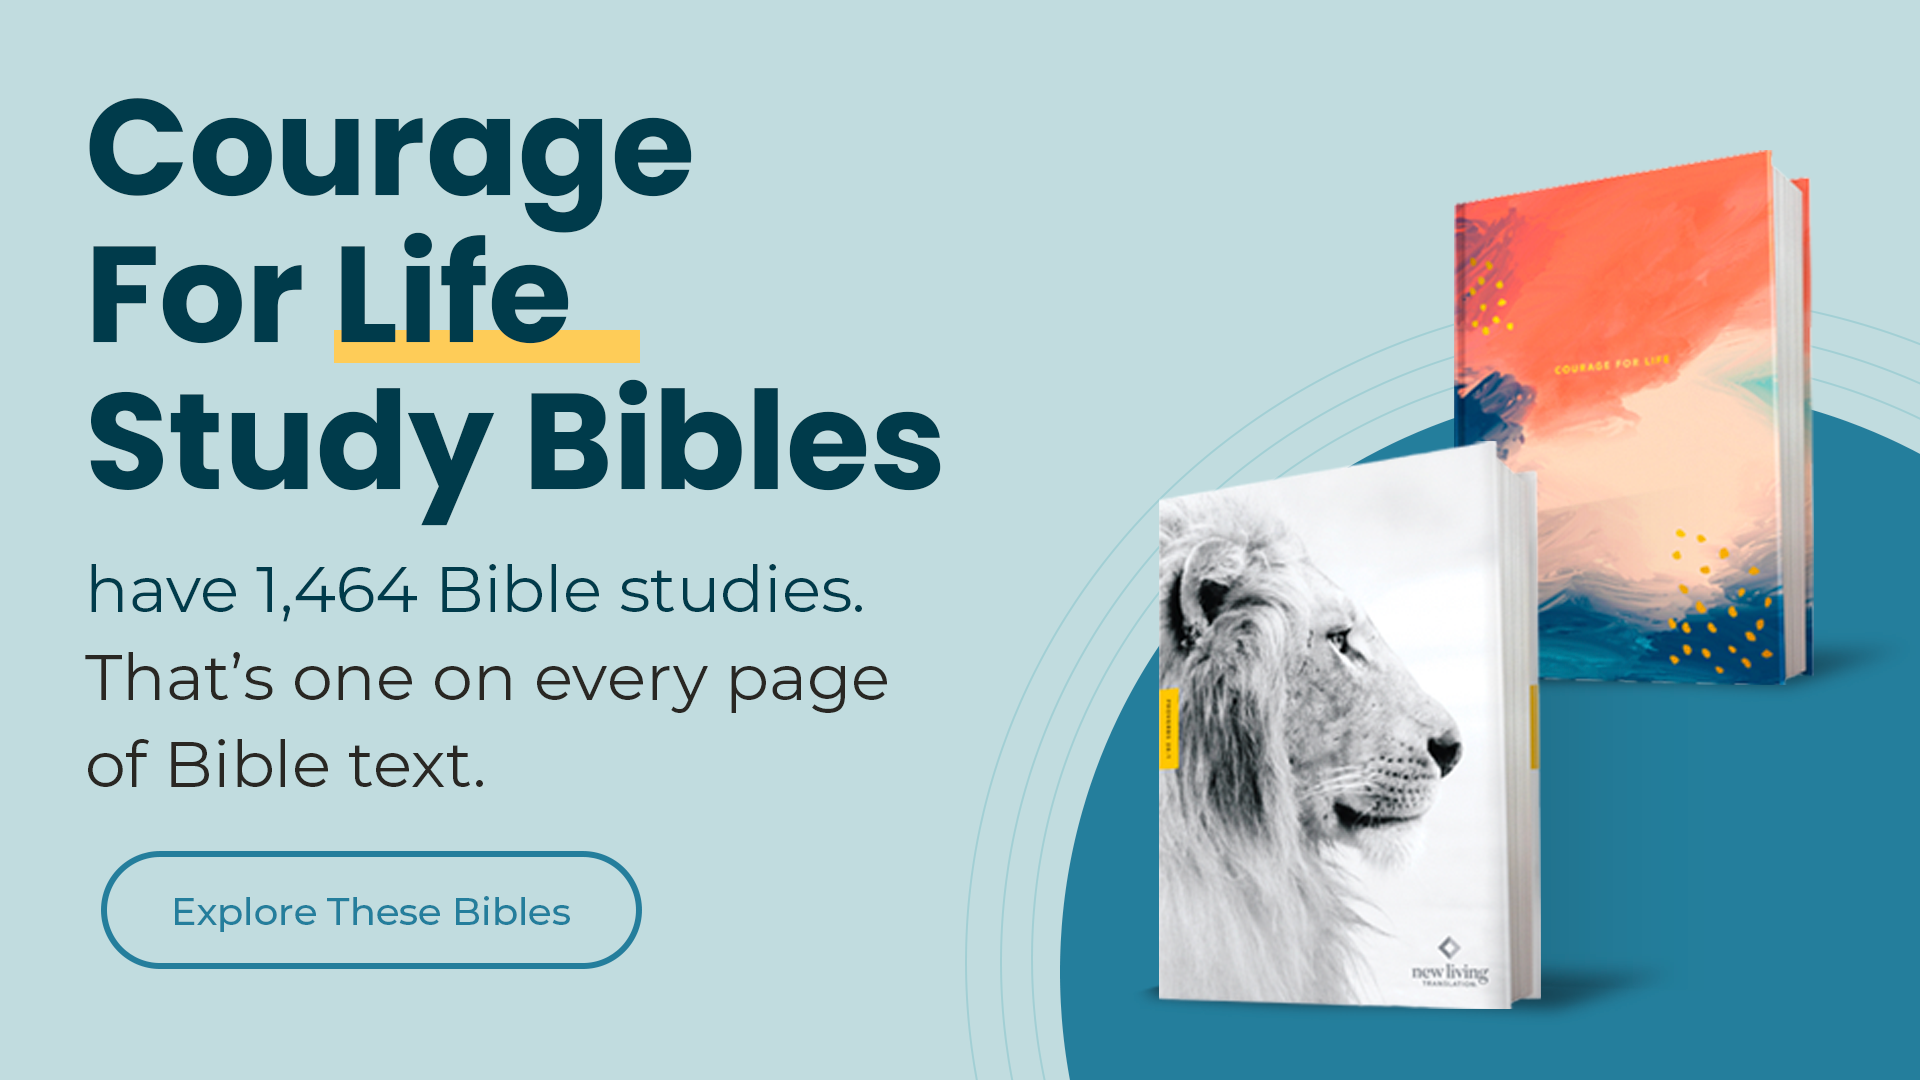 Courage For Life Study Bibles